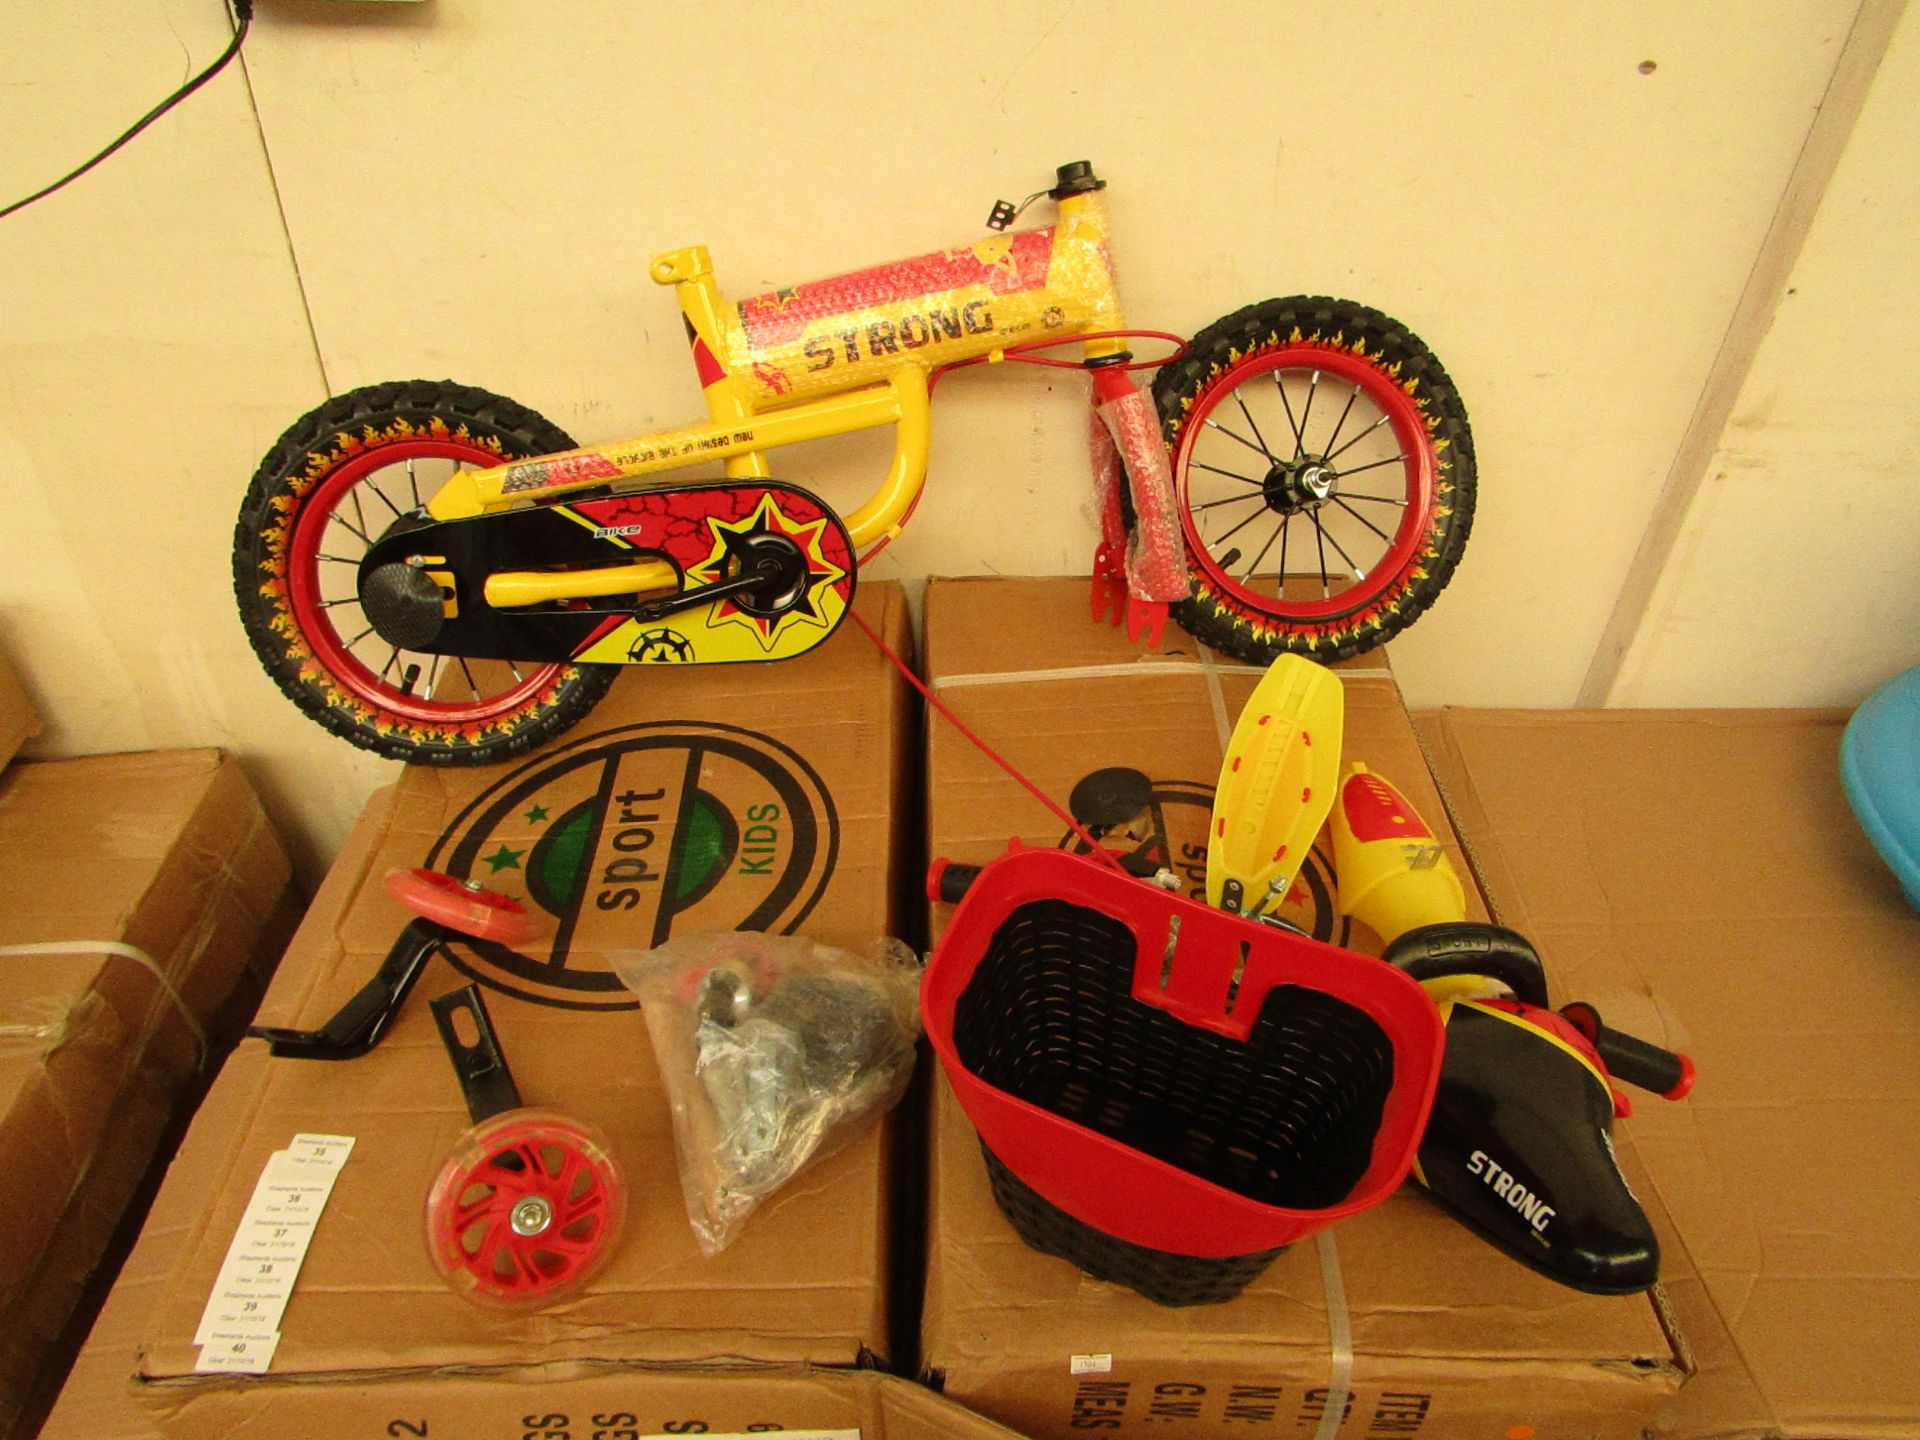 Sport kids Red colour bicycle with stabilisers, new and boxed. (Picture is to illustrate design